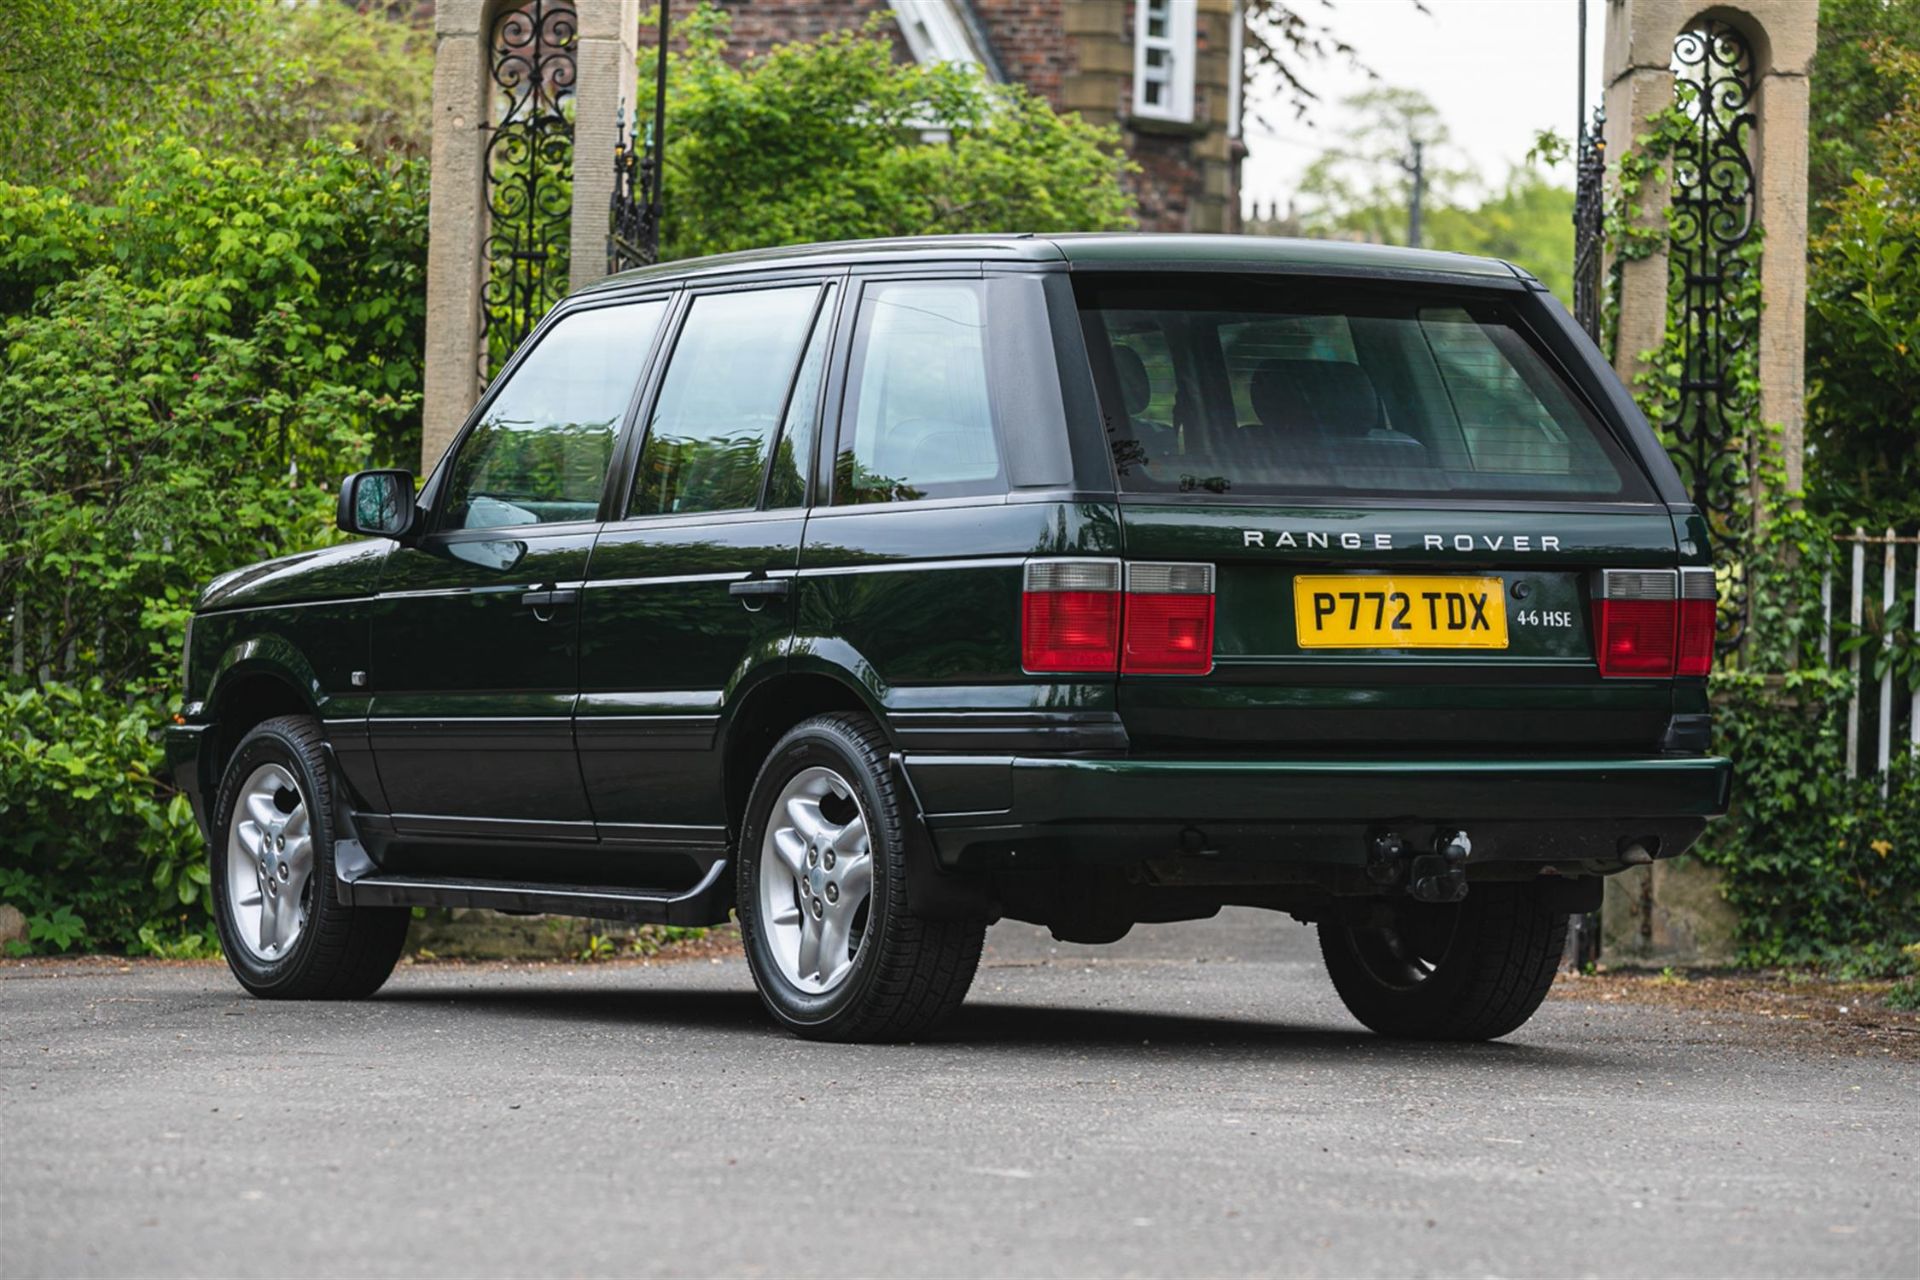 1996 Range Rover P38 4.6 HSE - Image 4 of 10